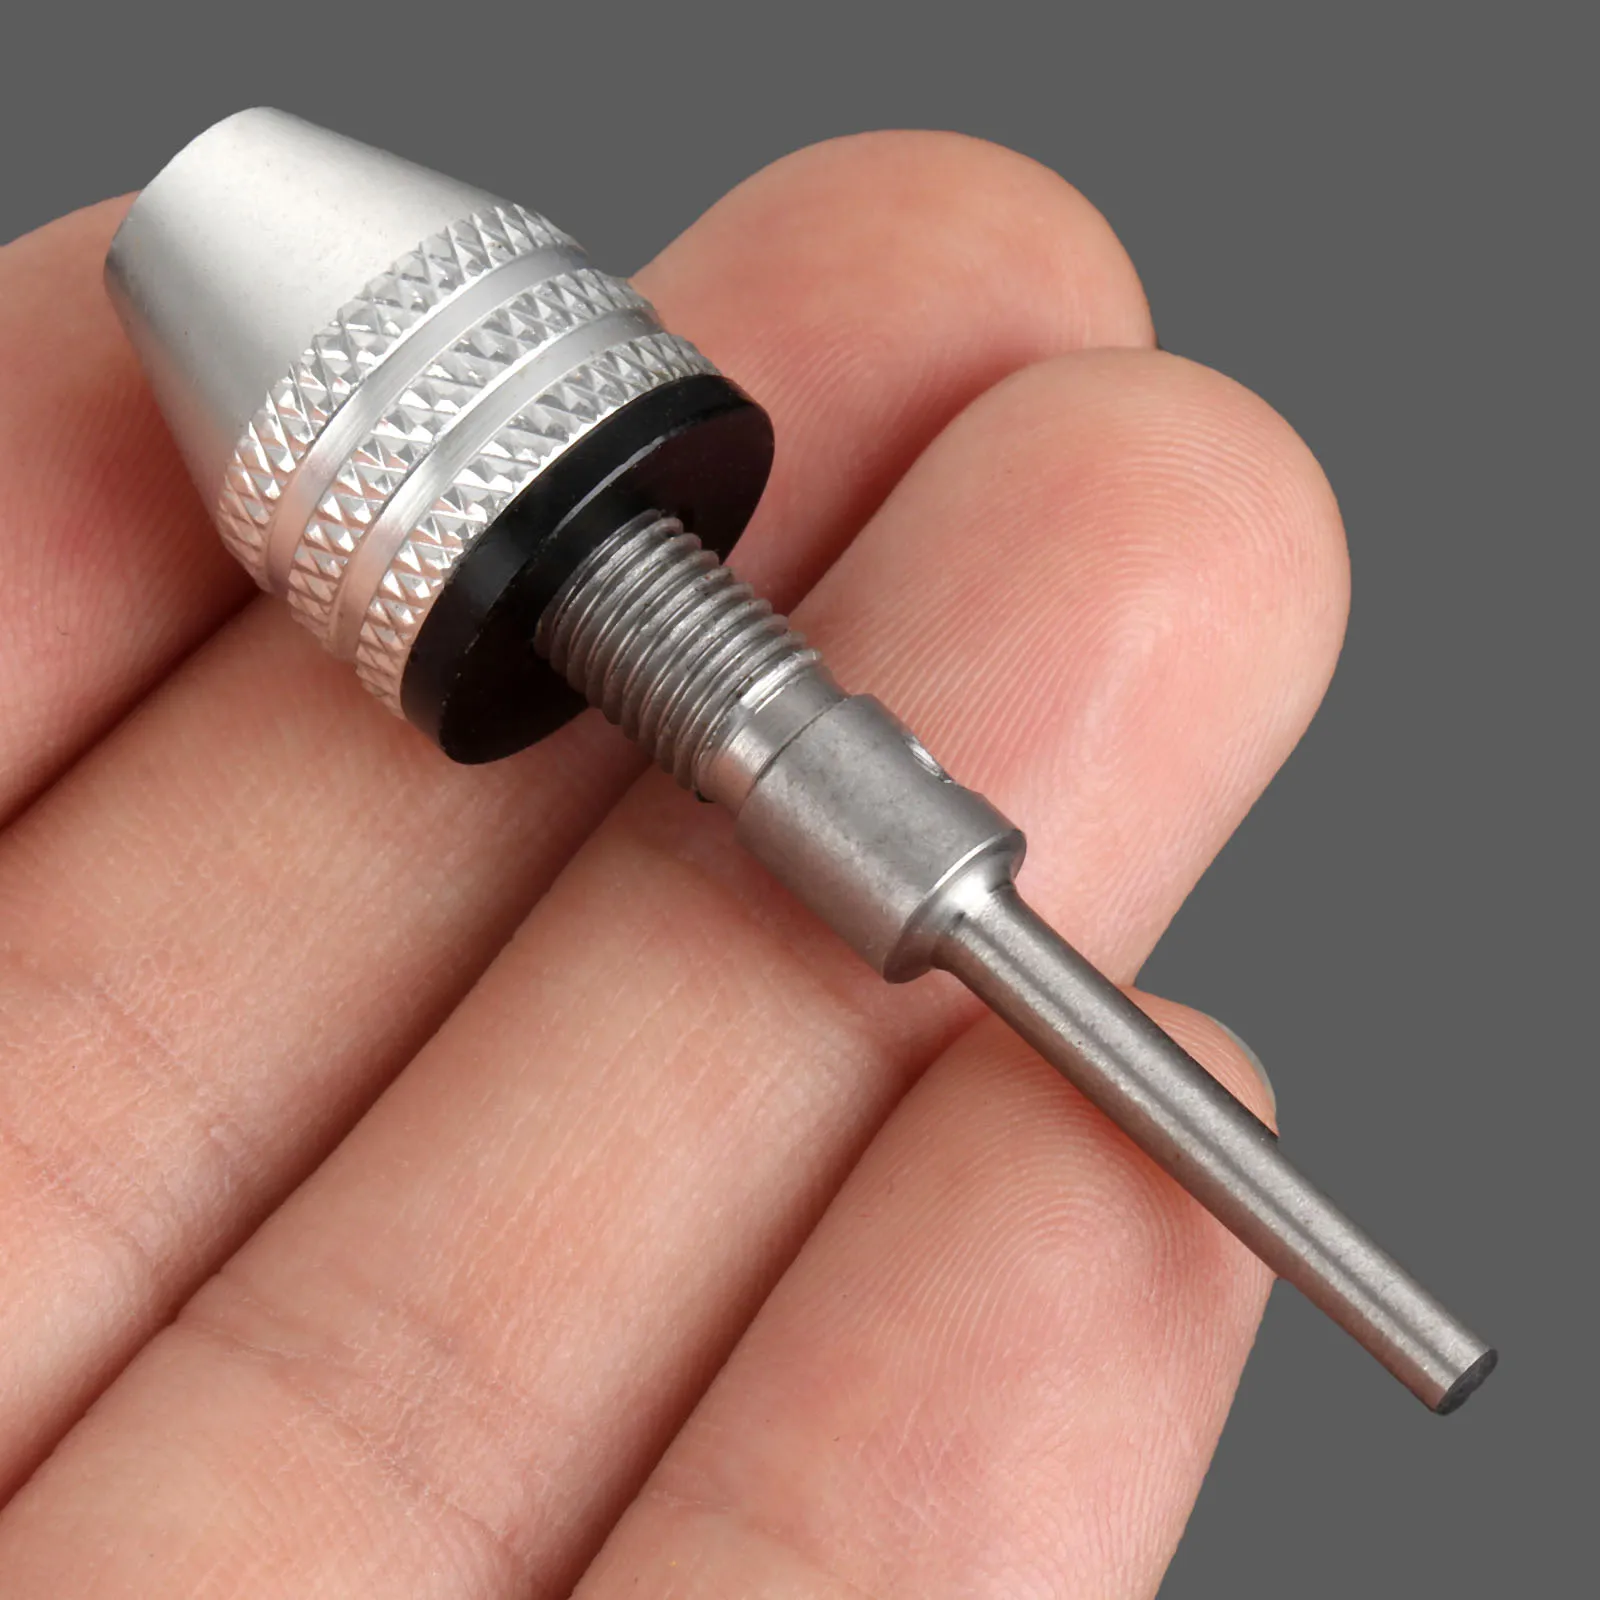 3mm Shank Mini Drill Chuck Adapter Converter For Power Impact Driver Grinding Engraving Machine Conversion Drill Chuck 0.3-3.4mm stabilize your power tool with rule for electric drill grinding machine handle replacement side handle hammer impact drill